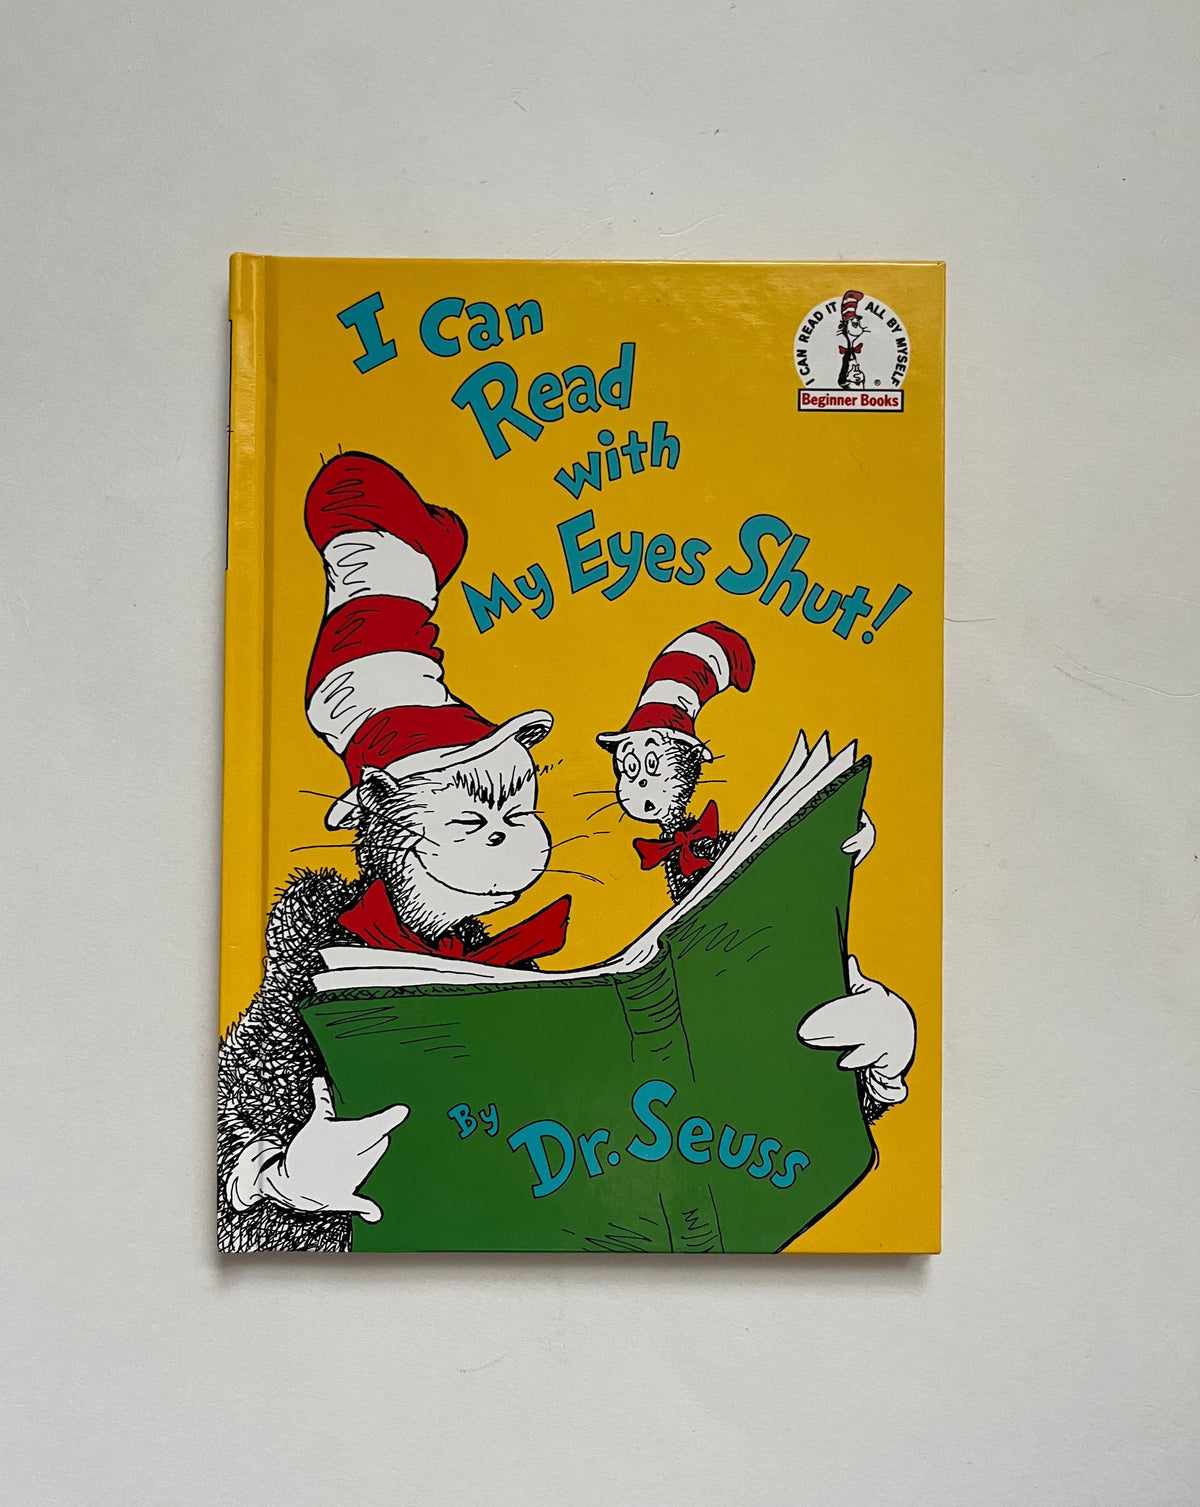 I Can Read with my Eyes Shut! by Dr. Seuss